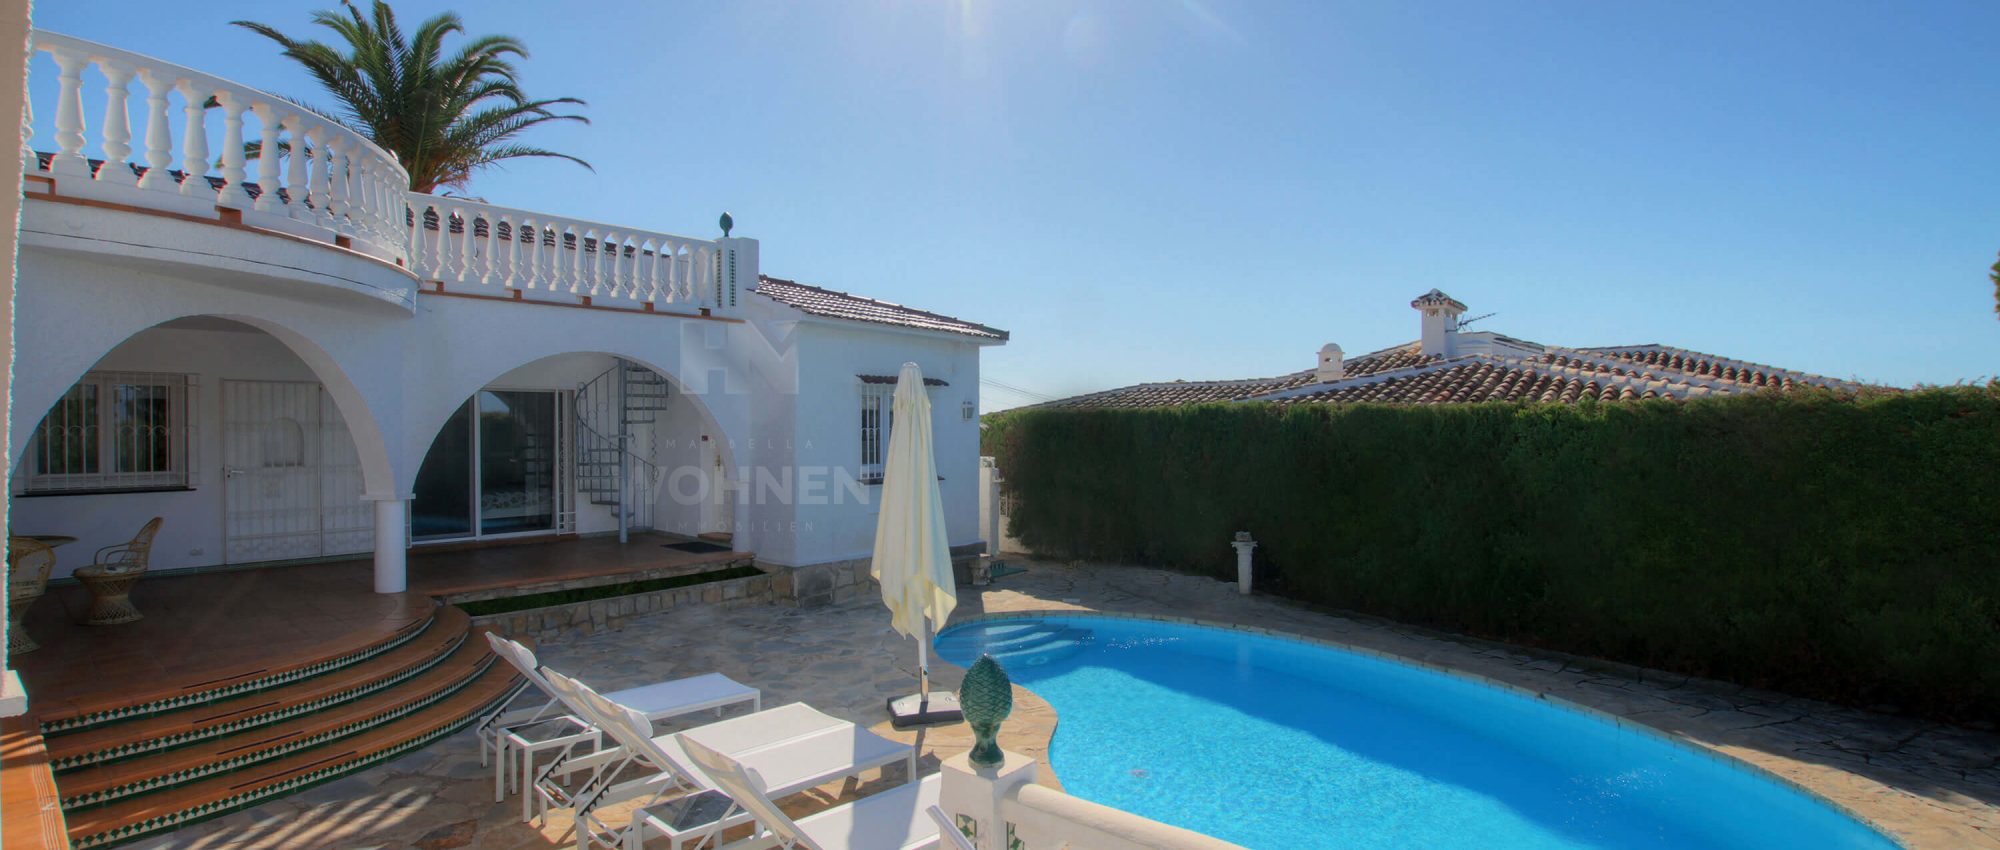 Very cozy detached house with panoramic views in Elviria